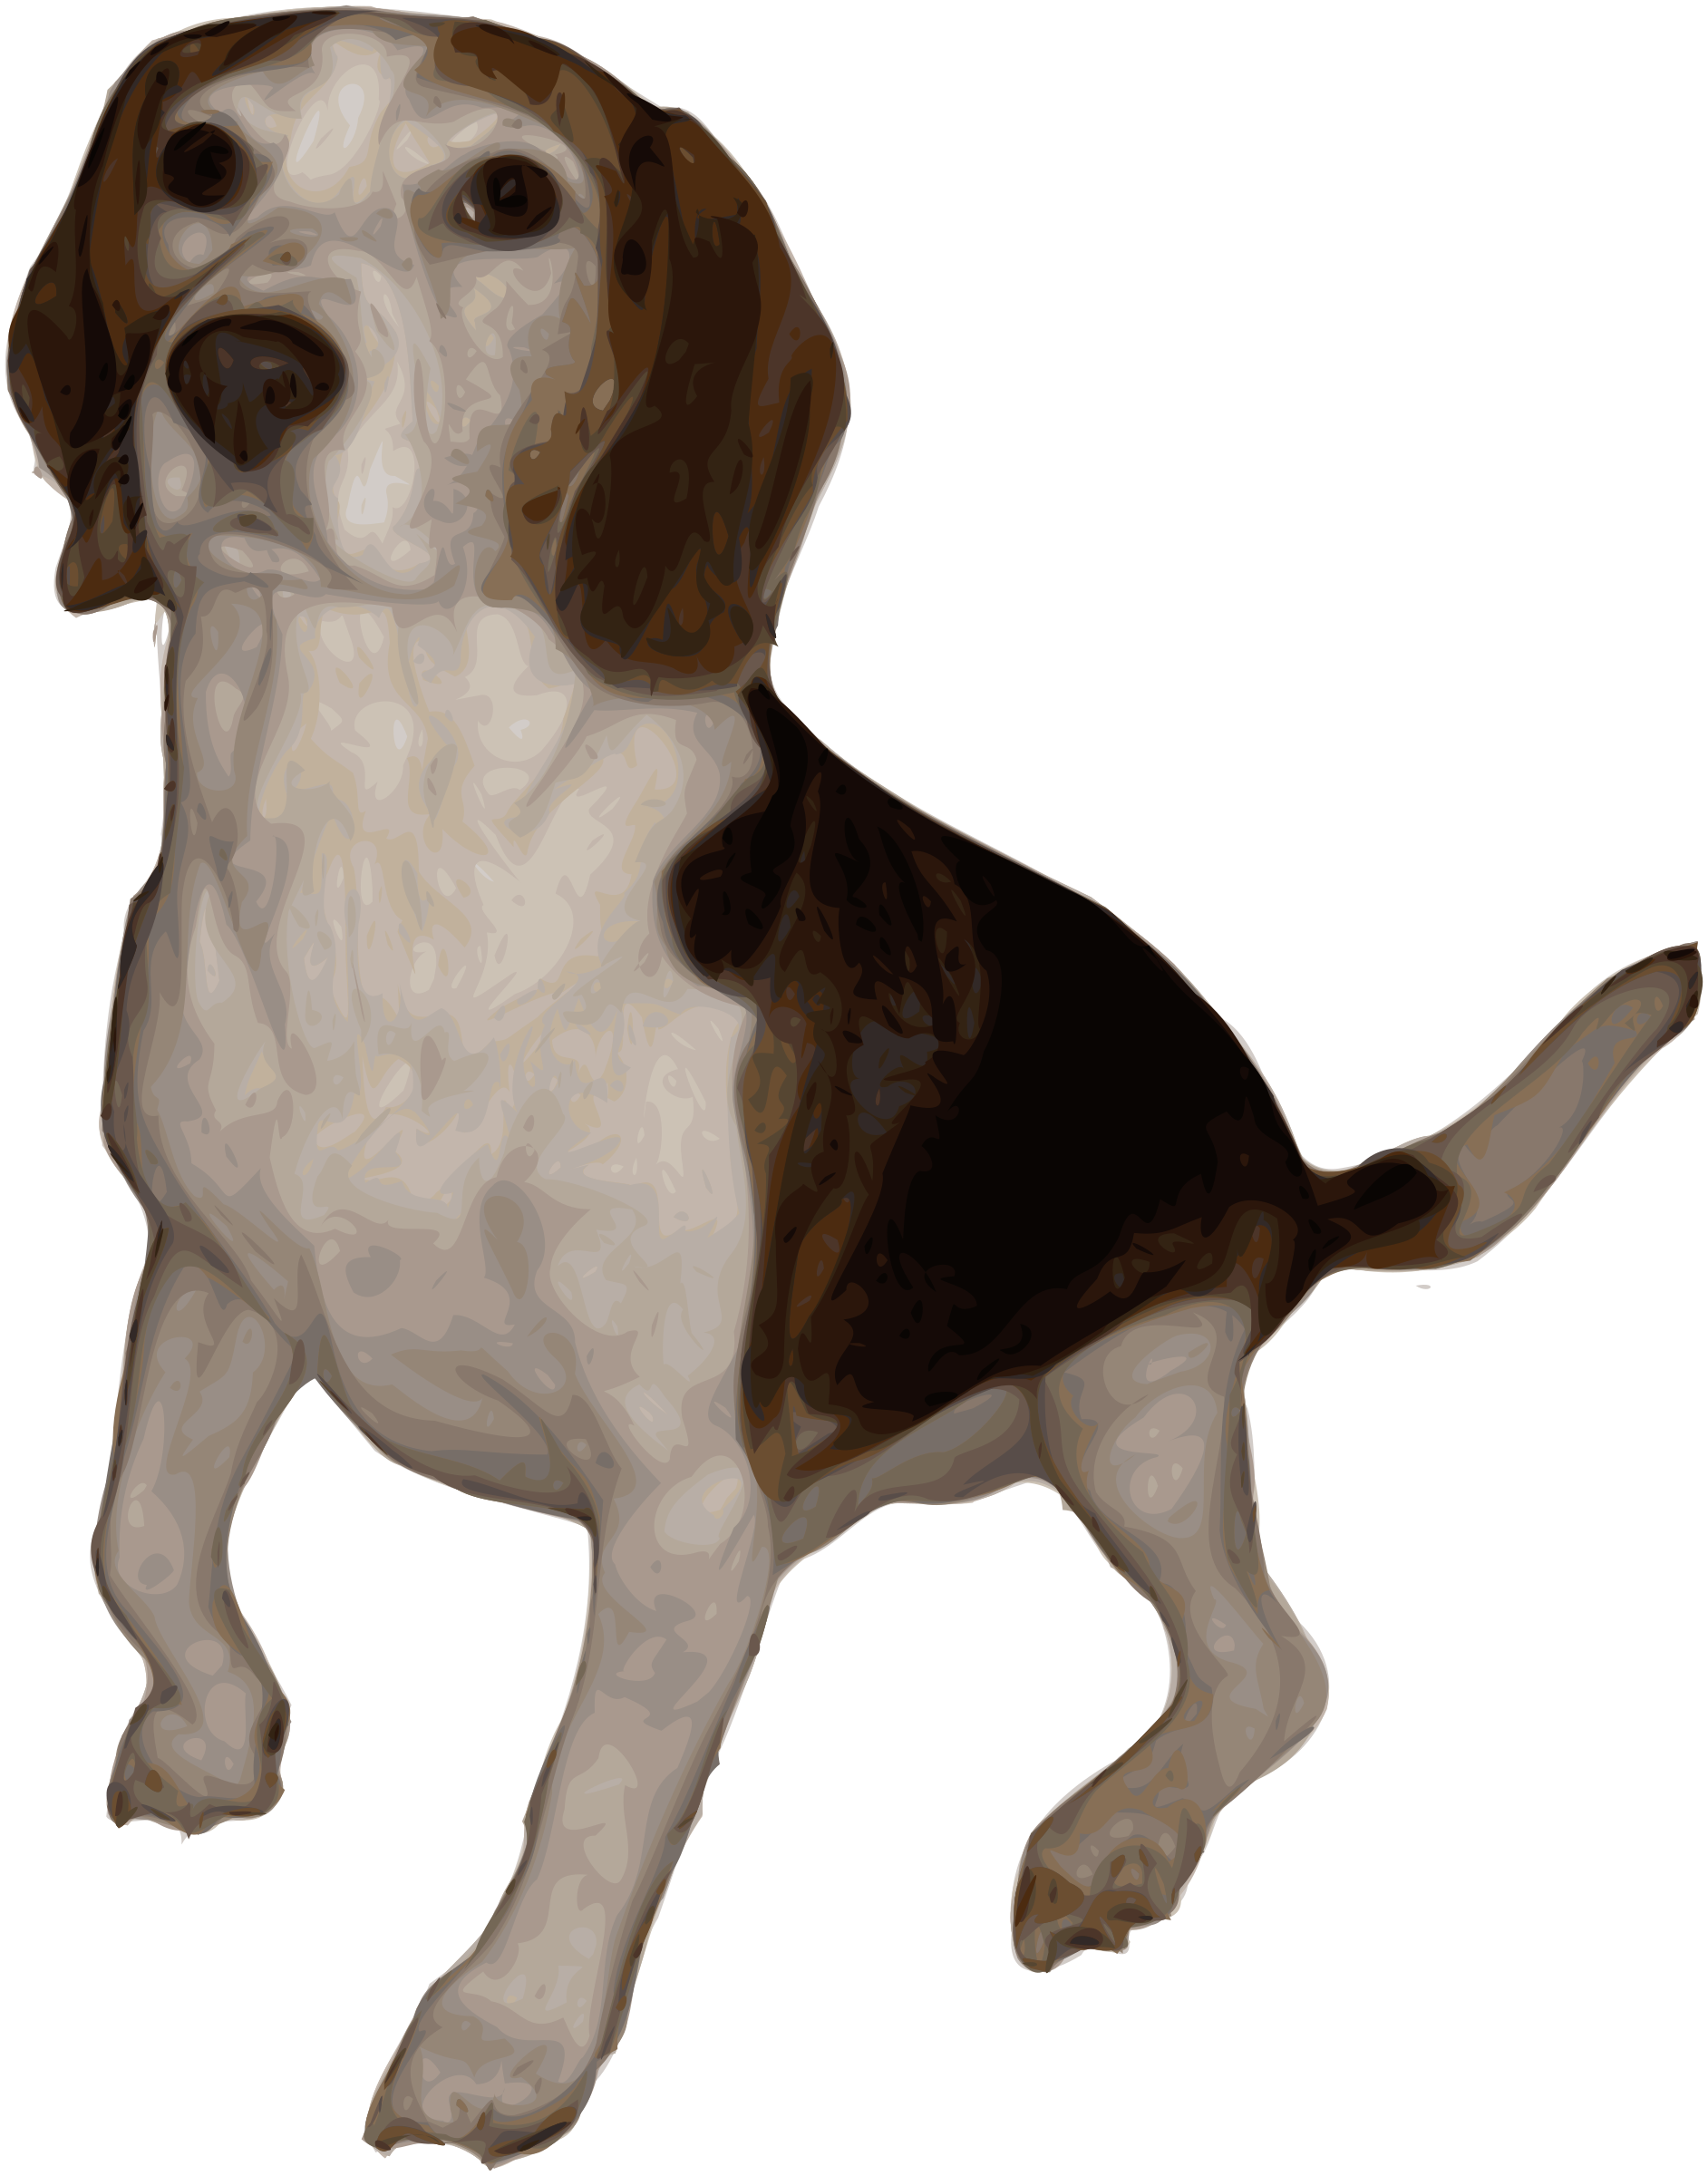 Beagle Small Version by Merlin2525